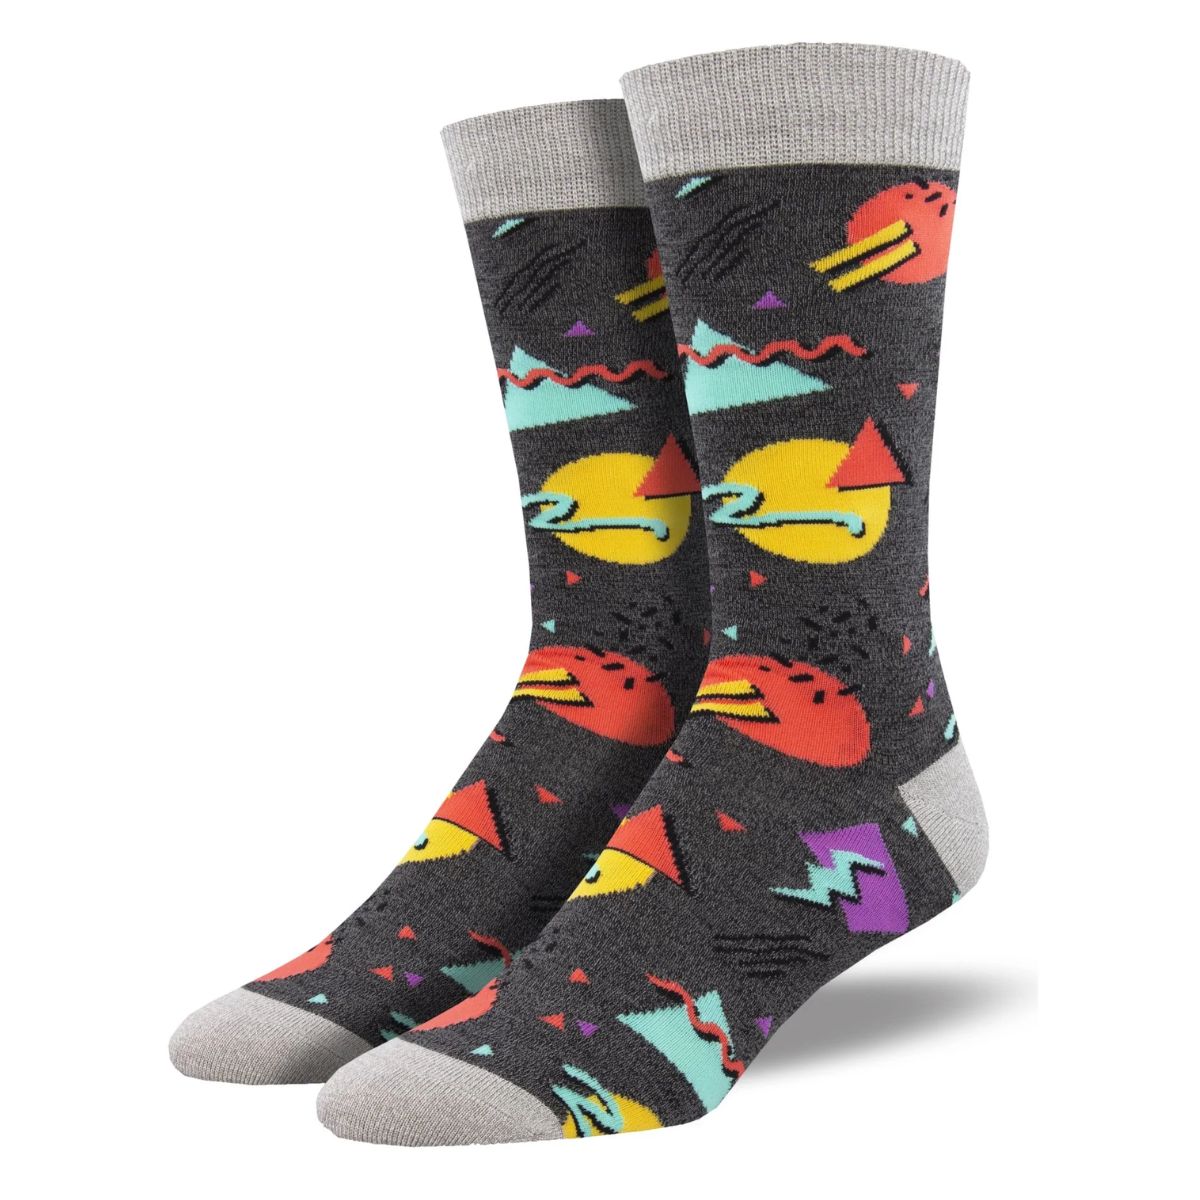 90's vibe socks a pair of charcoal grey crew socks with funky shape print